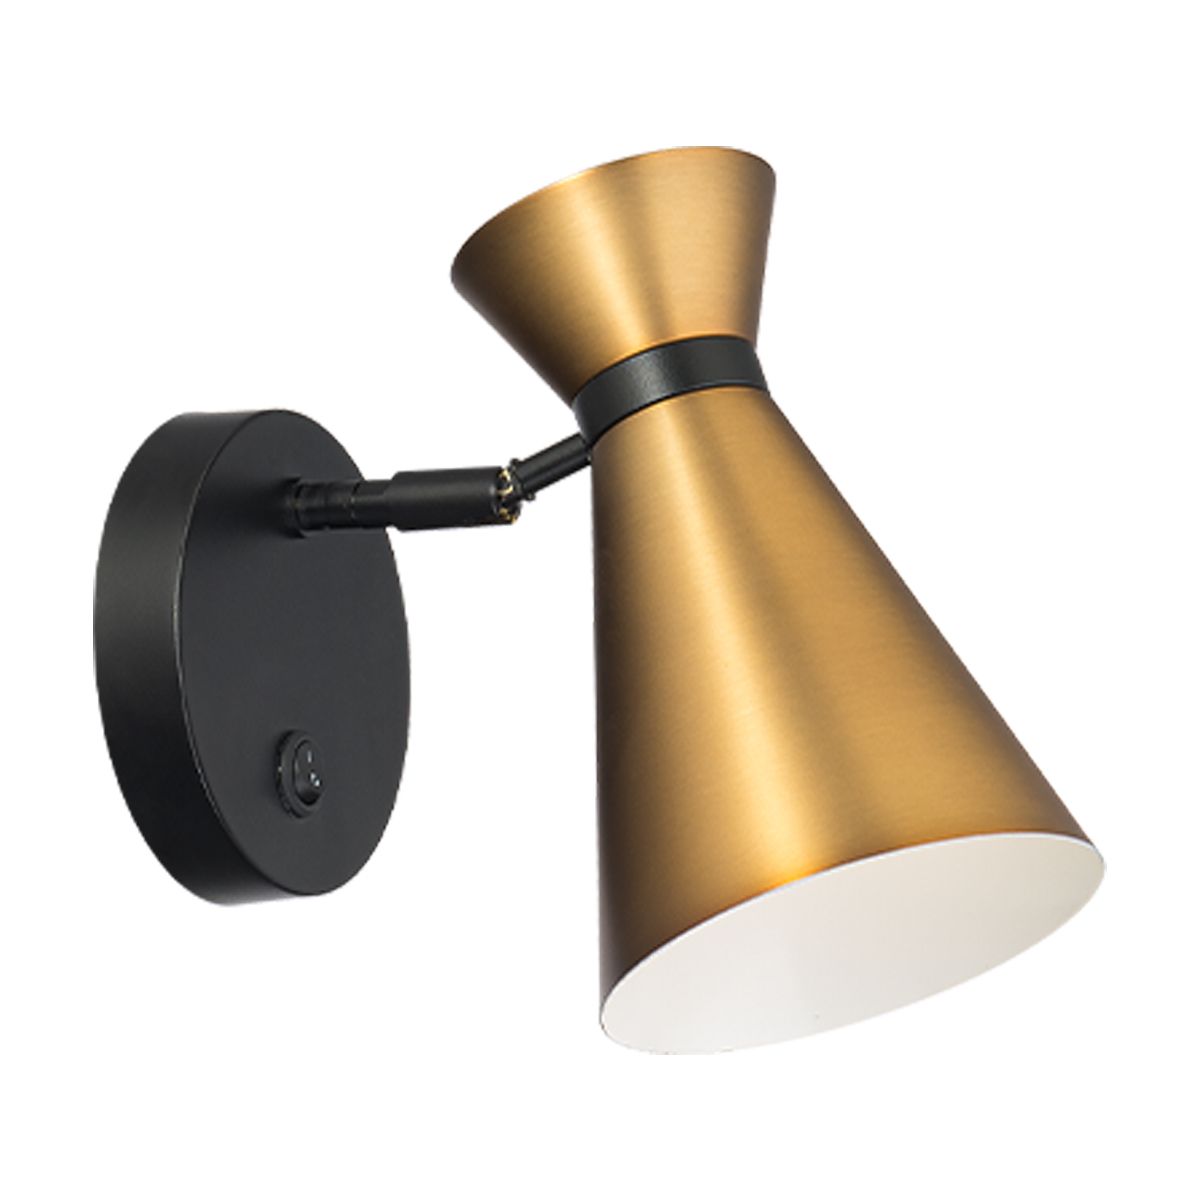 Pin Up 8 in. LED Wall Sconce with swing arm 3000K Aged Brass & Black Finish